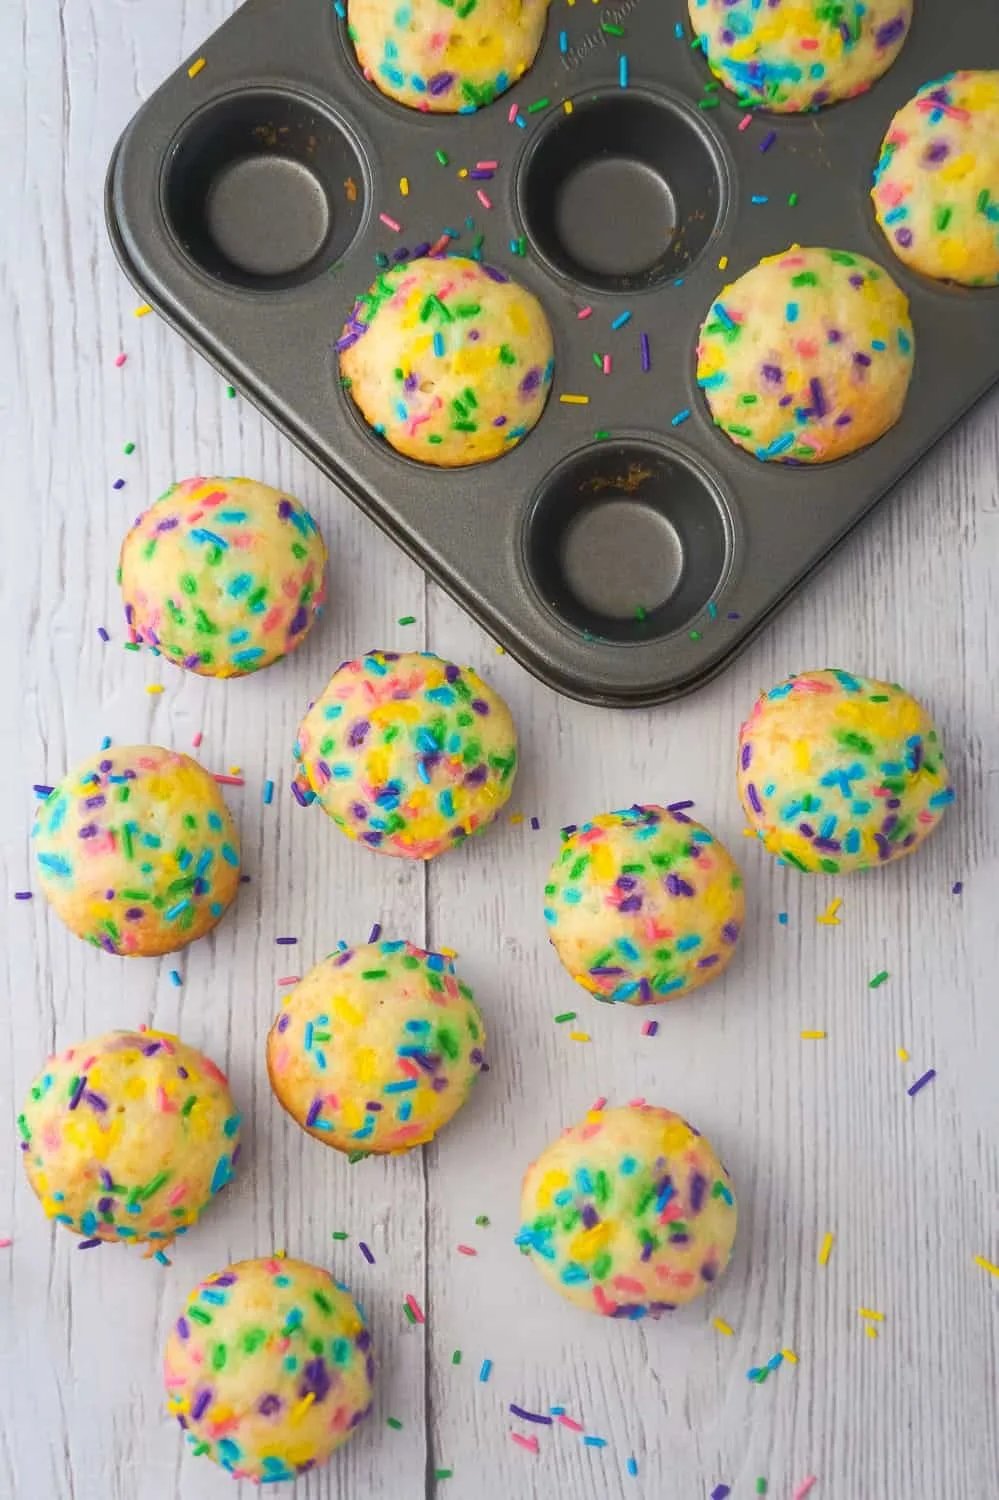 Mini Birthday Cake Banana Muffins are an easy snack or dessert your kids will love. These colourful mini muffins are made with confetti cake mix, ripe bananas and lots of sprinkles.